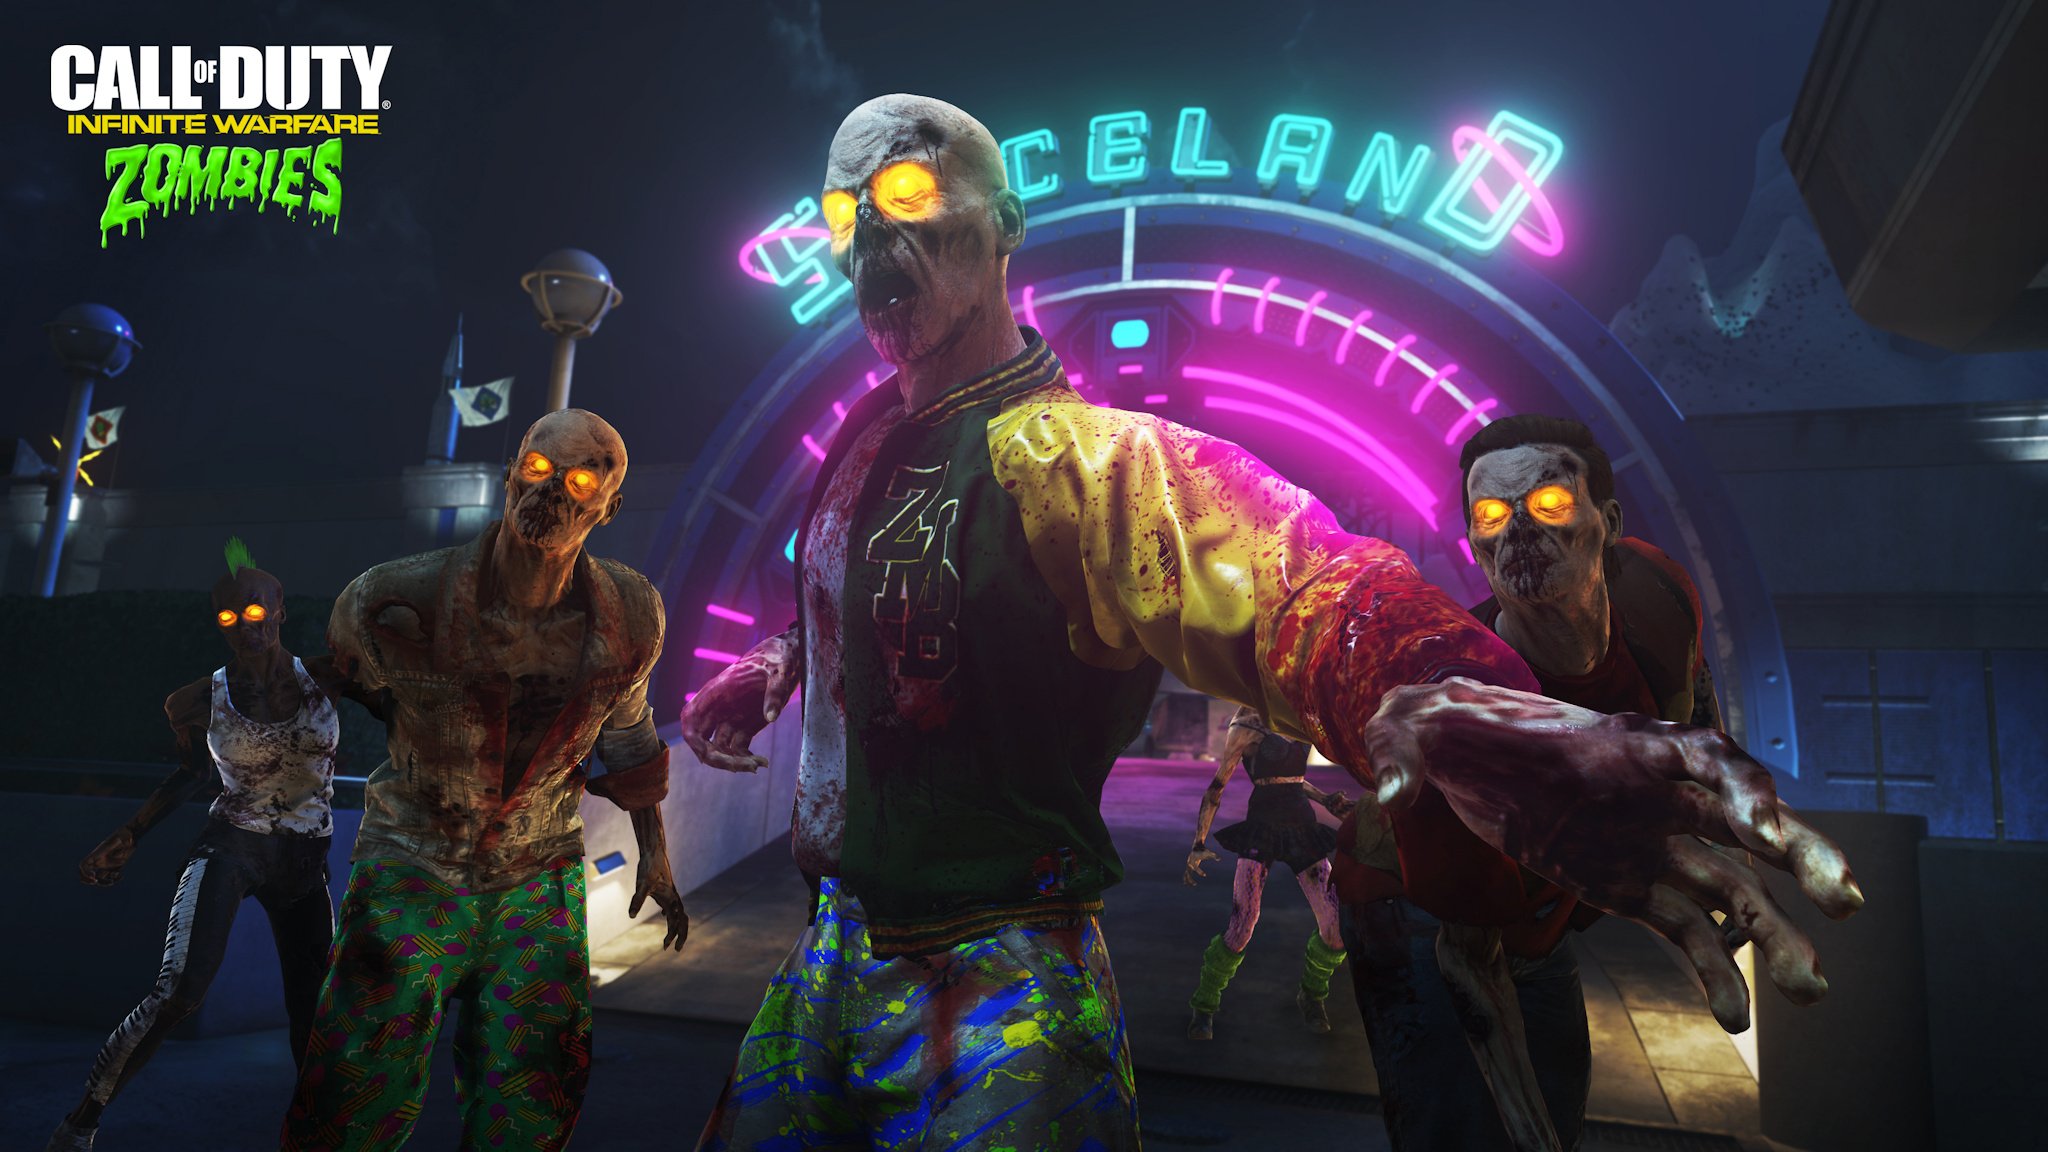 Our neon-colored impressions of Call of Duty: Infinite Warfare Zombies in Spaceland